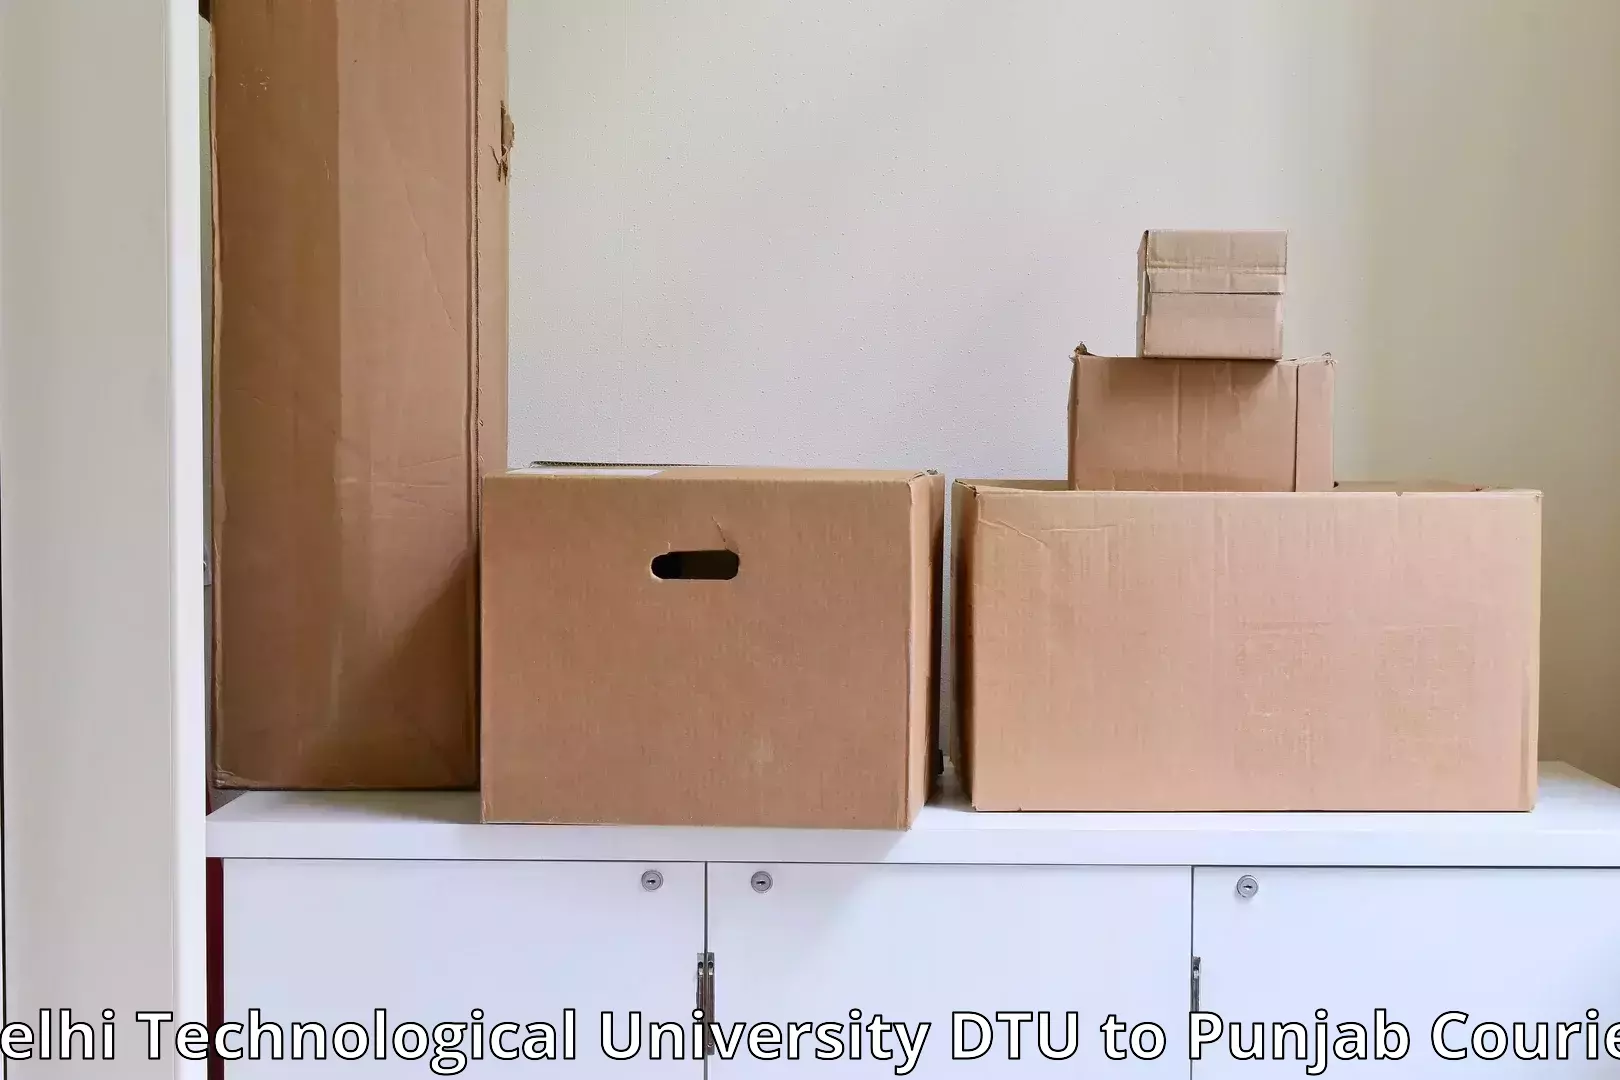 Household shifting services in Delhi Technological University DTU to Mehta Chowk